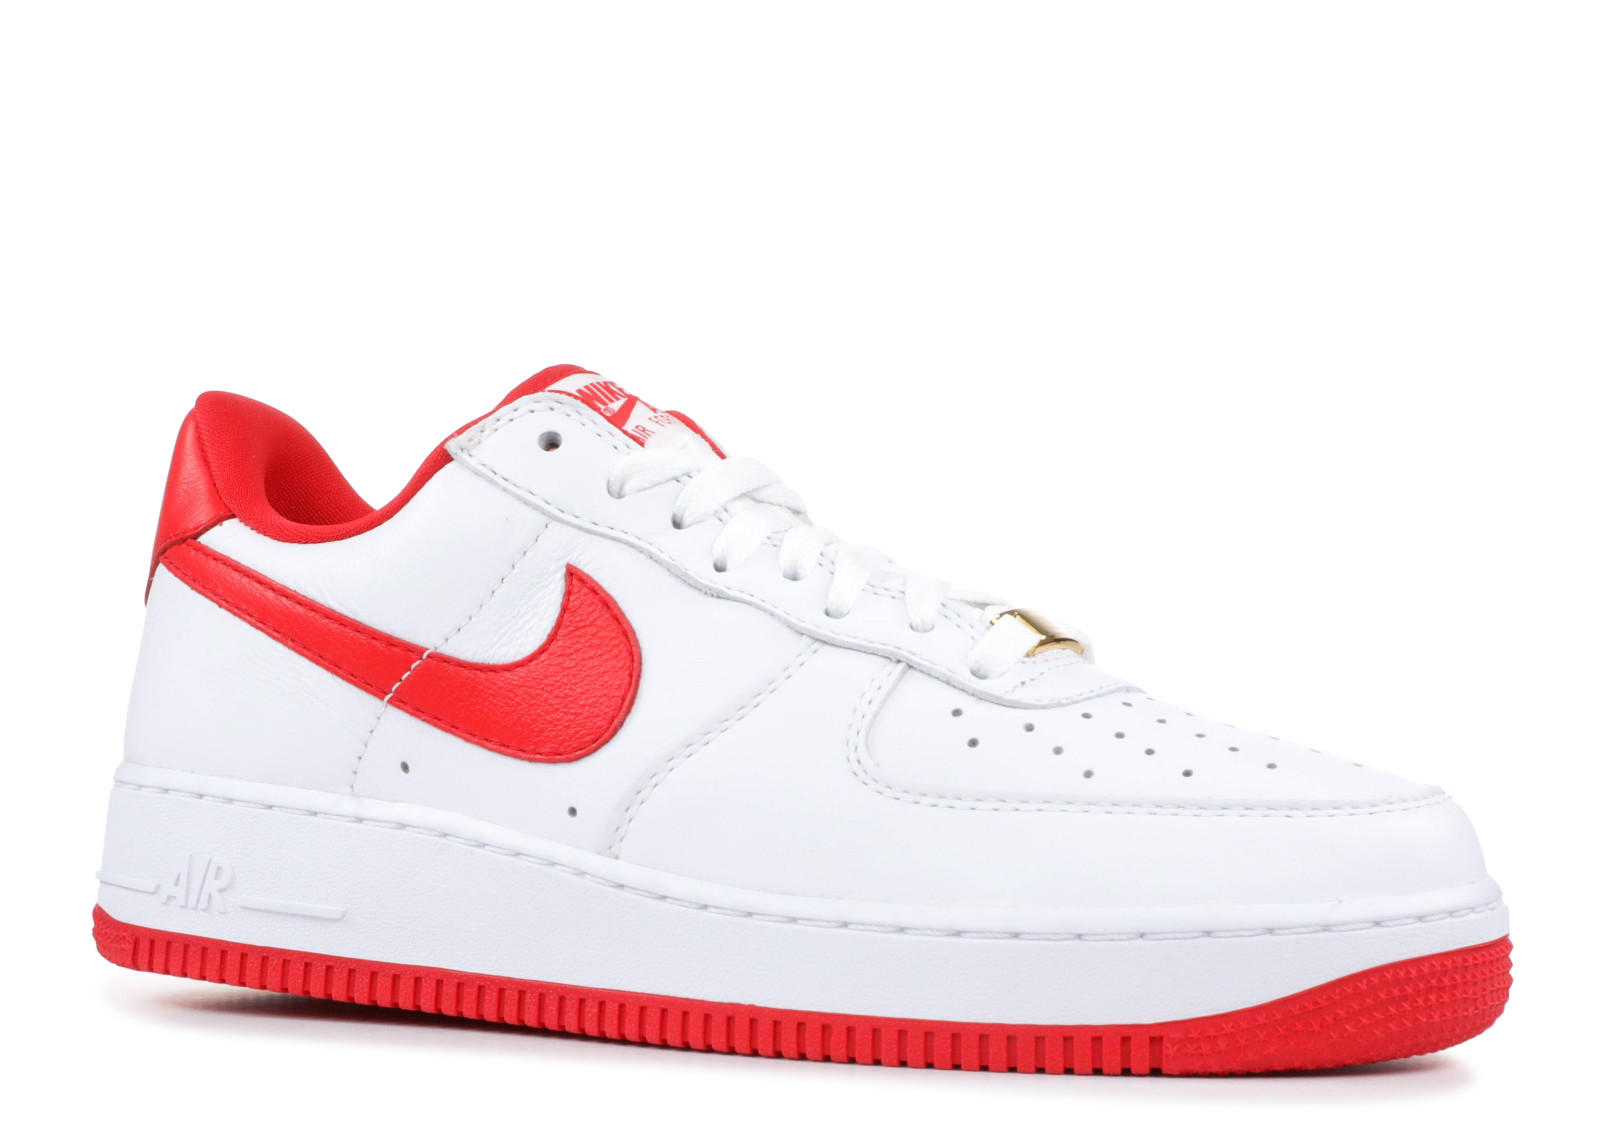 Air Force 1 Low Retro Ct 16 Qs fo Fi Fo White University Red AQ5107-100 ...